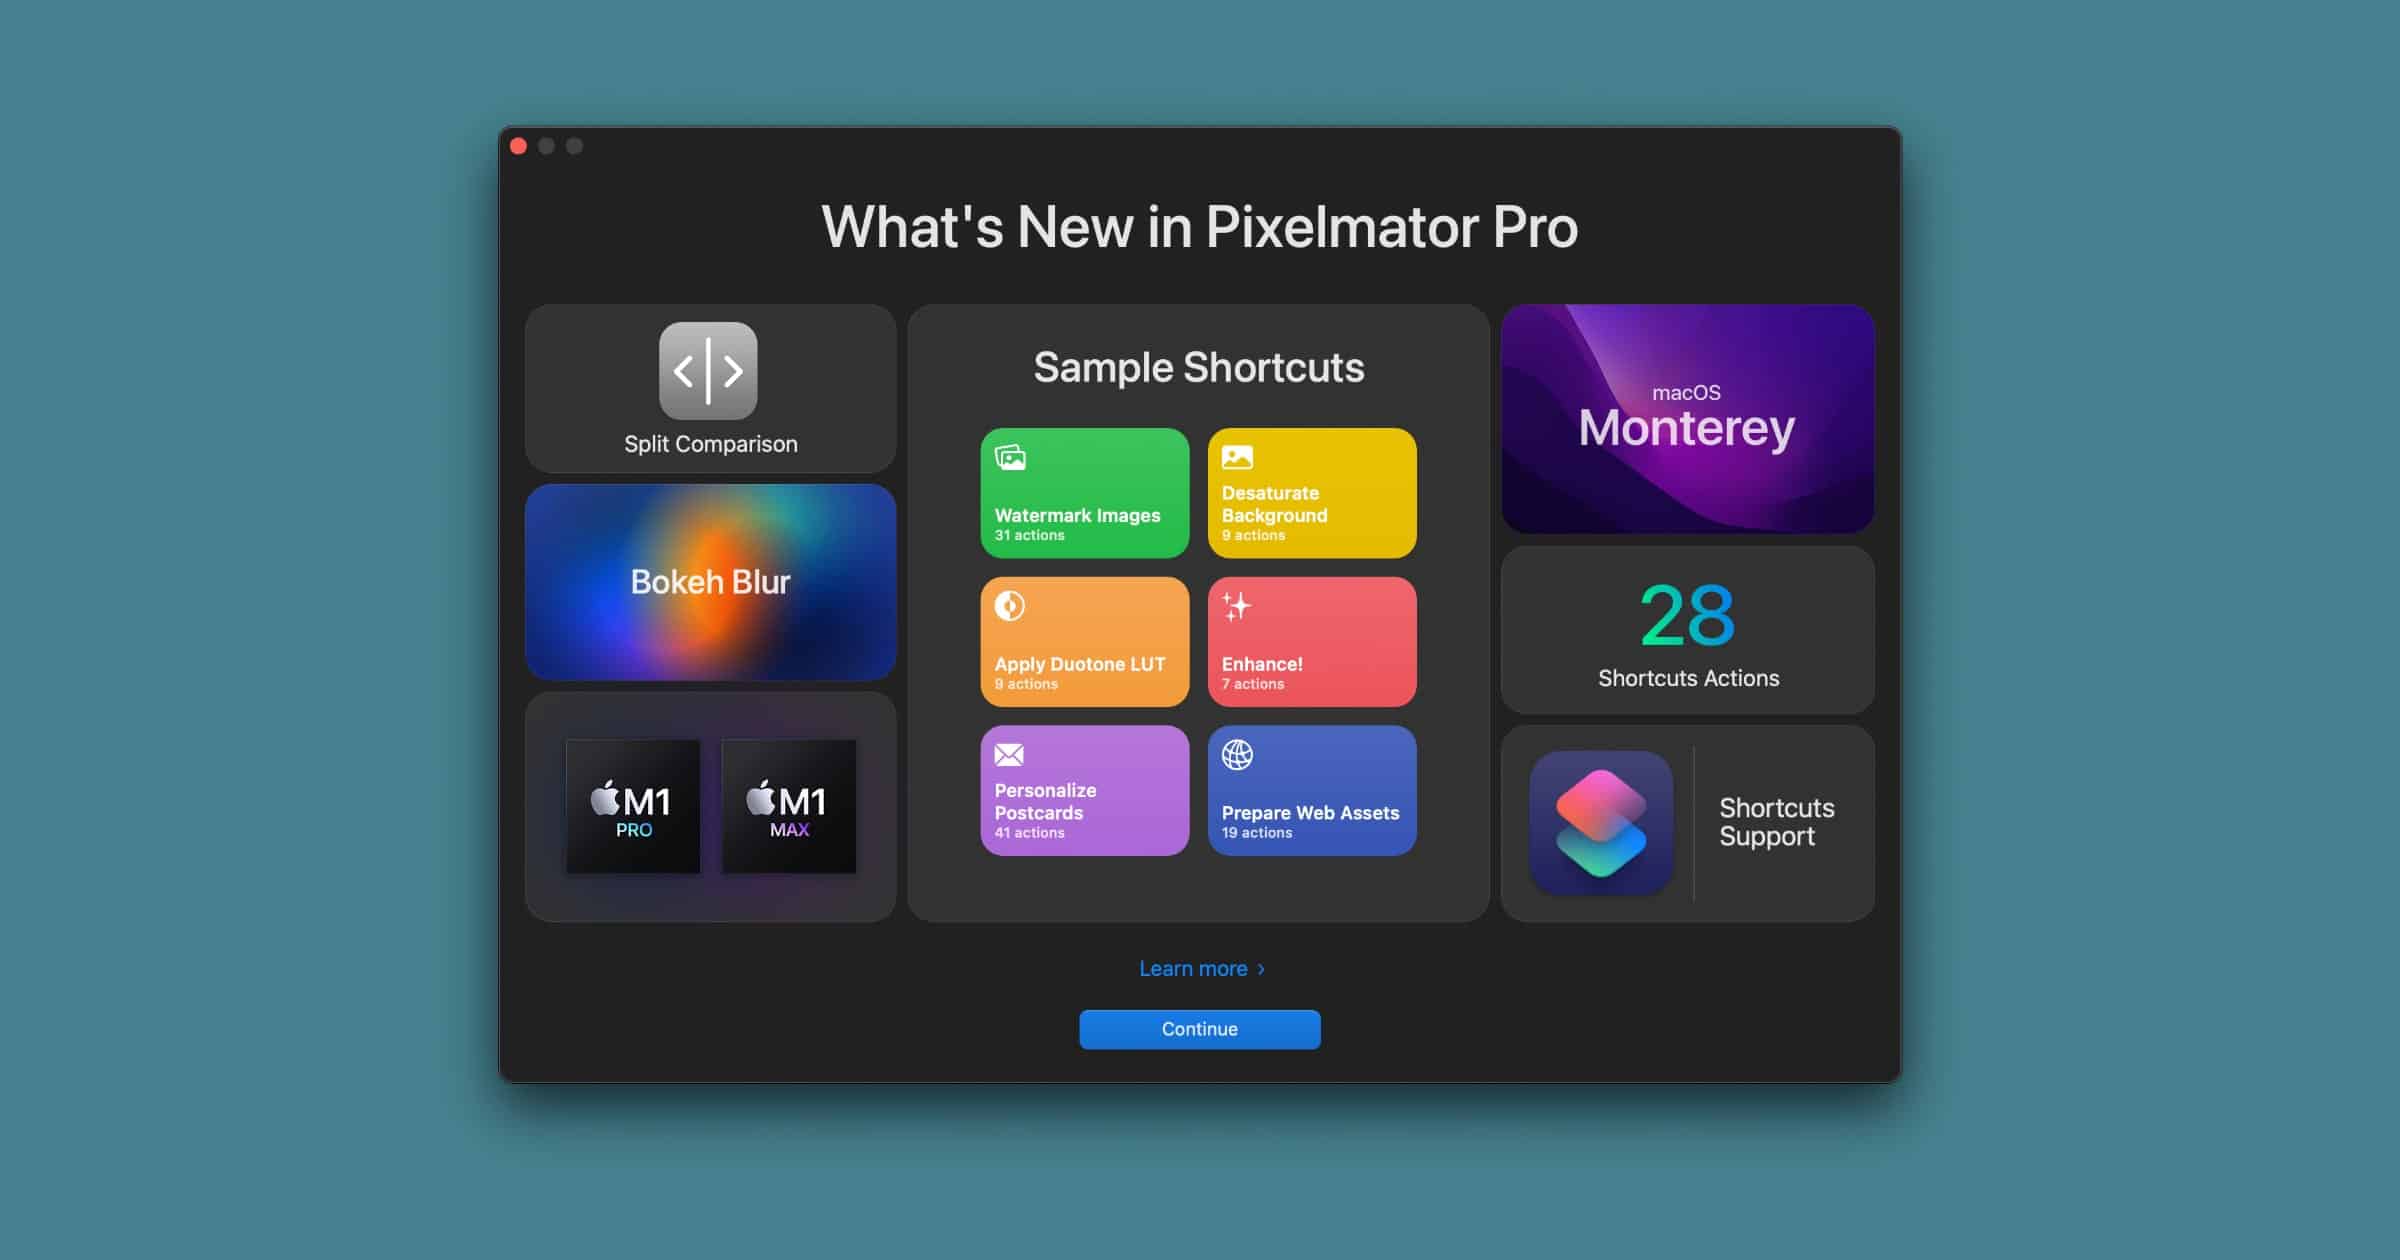 ‘Pixelmator Pro’ 2.2 Update Adds 28 Actions for Shortcuts